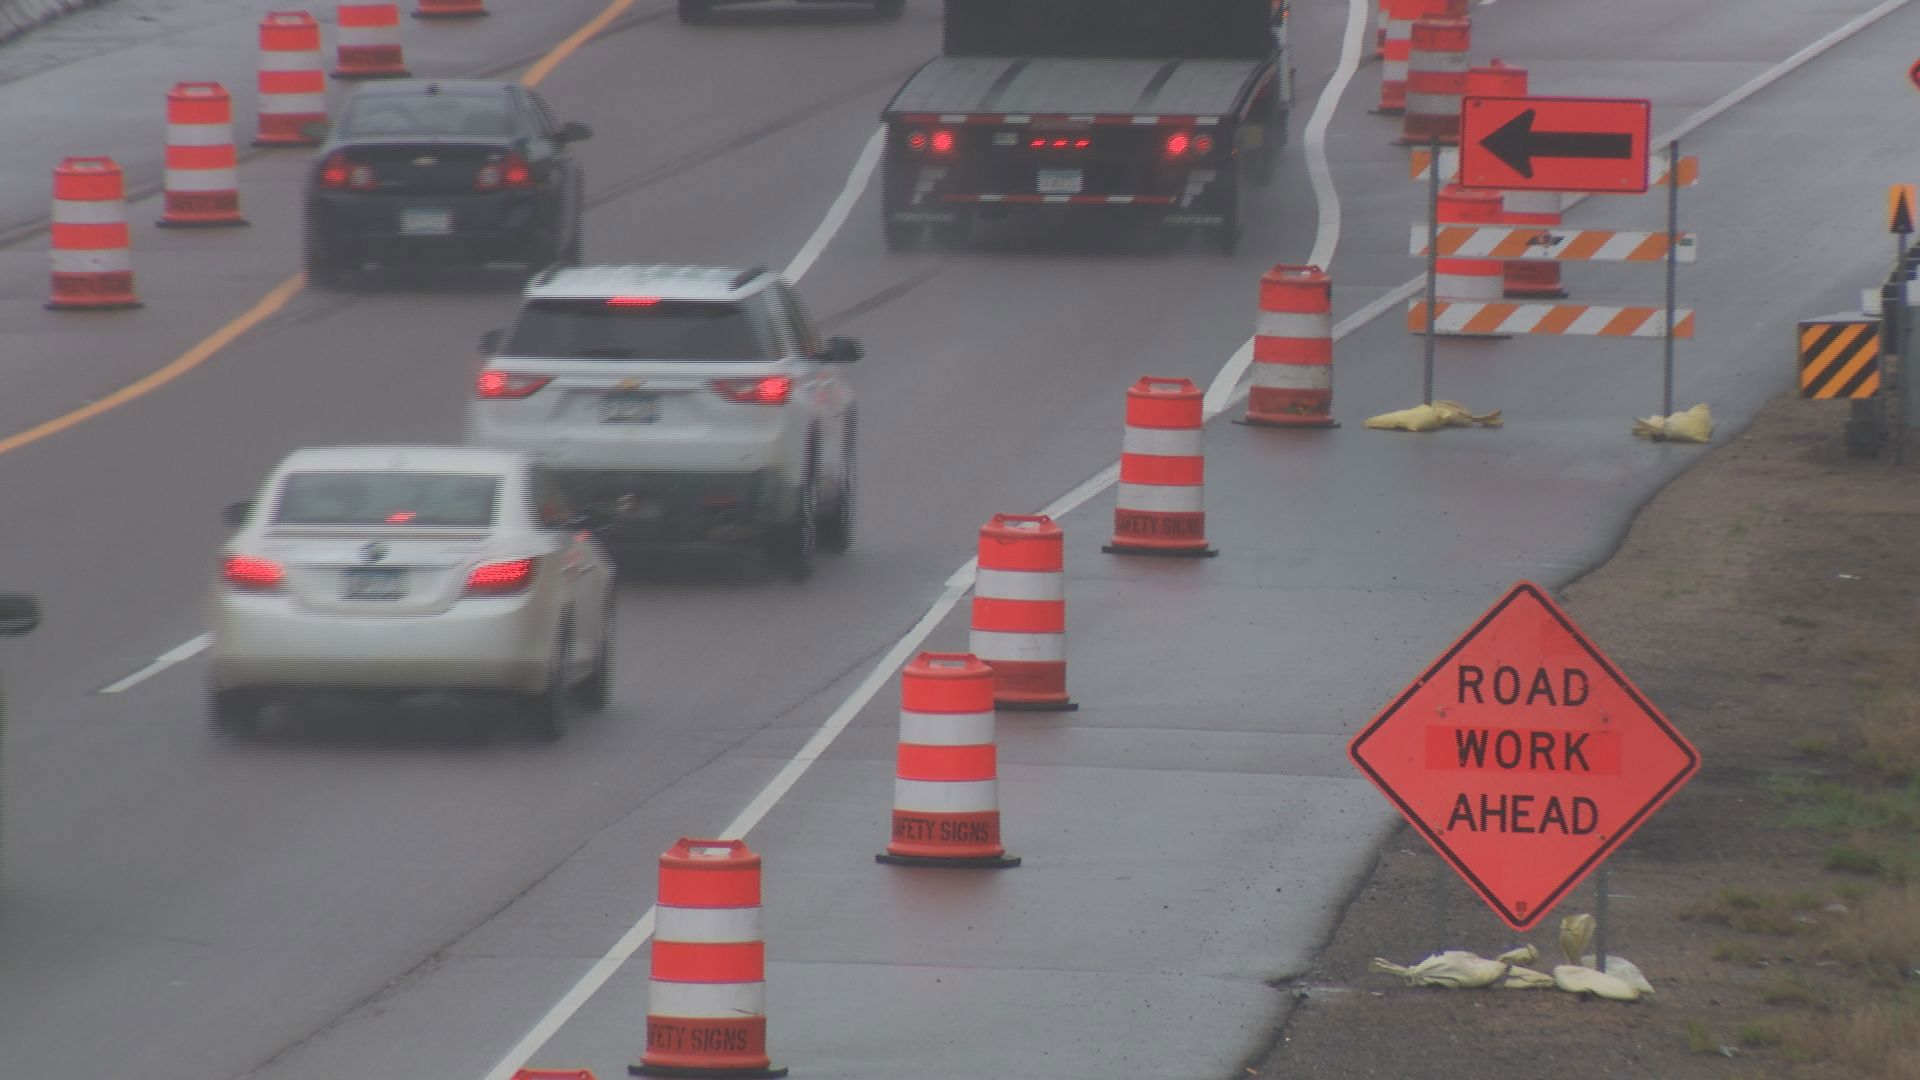 Motorists will encounter congestion and backups for the next six months as a 3-mile stretch of I-494 in Bloomington is rejuvenated.